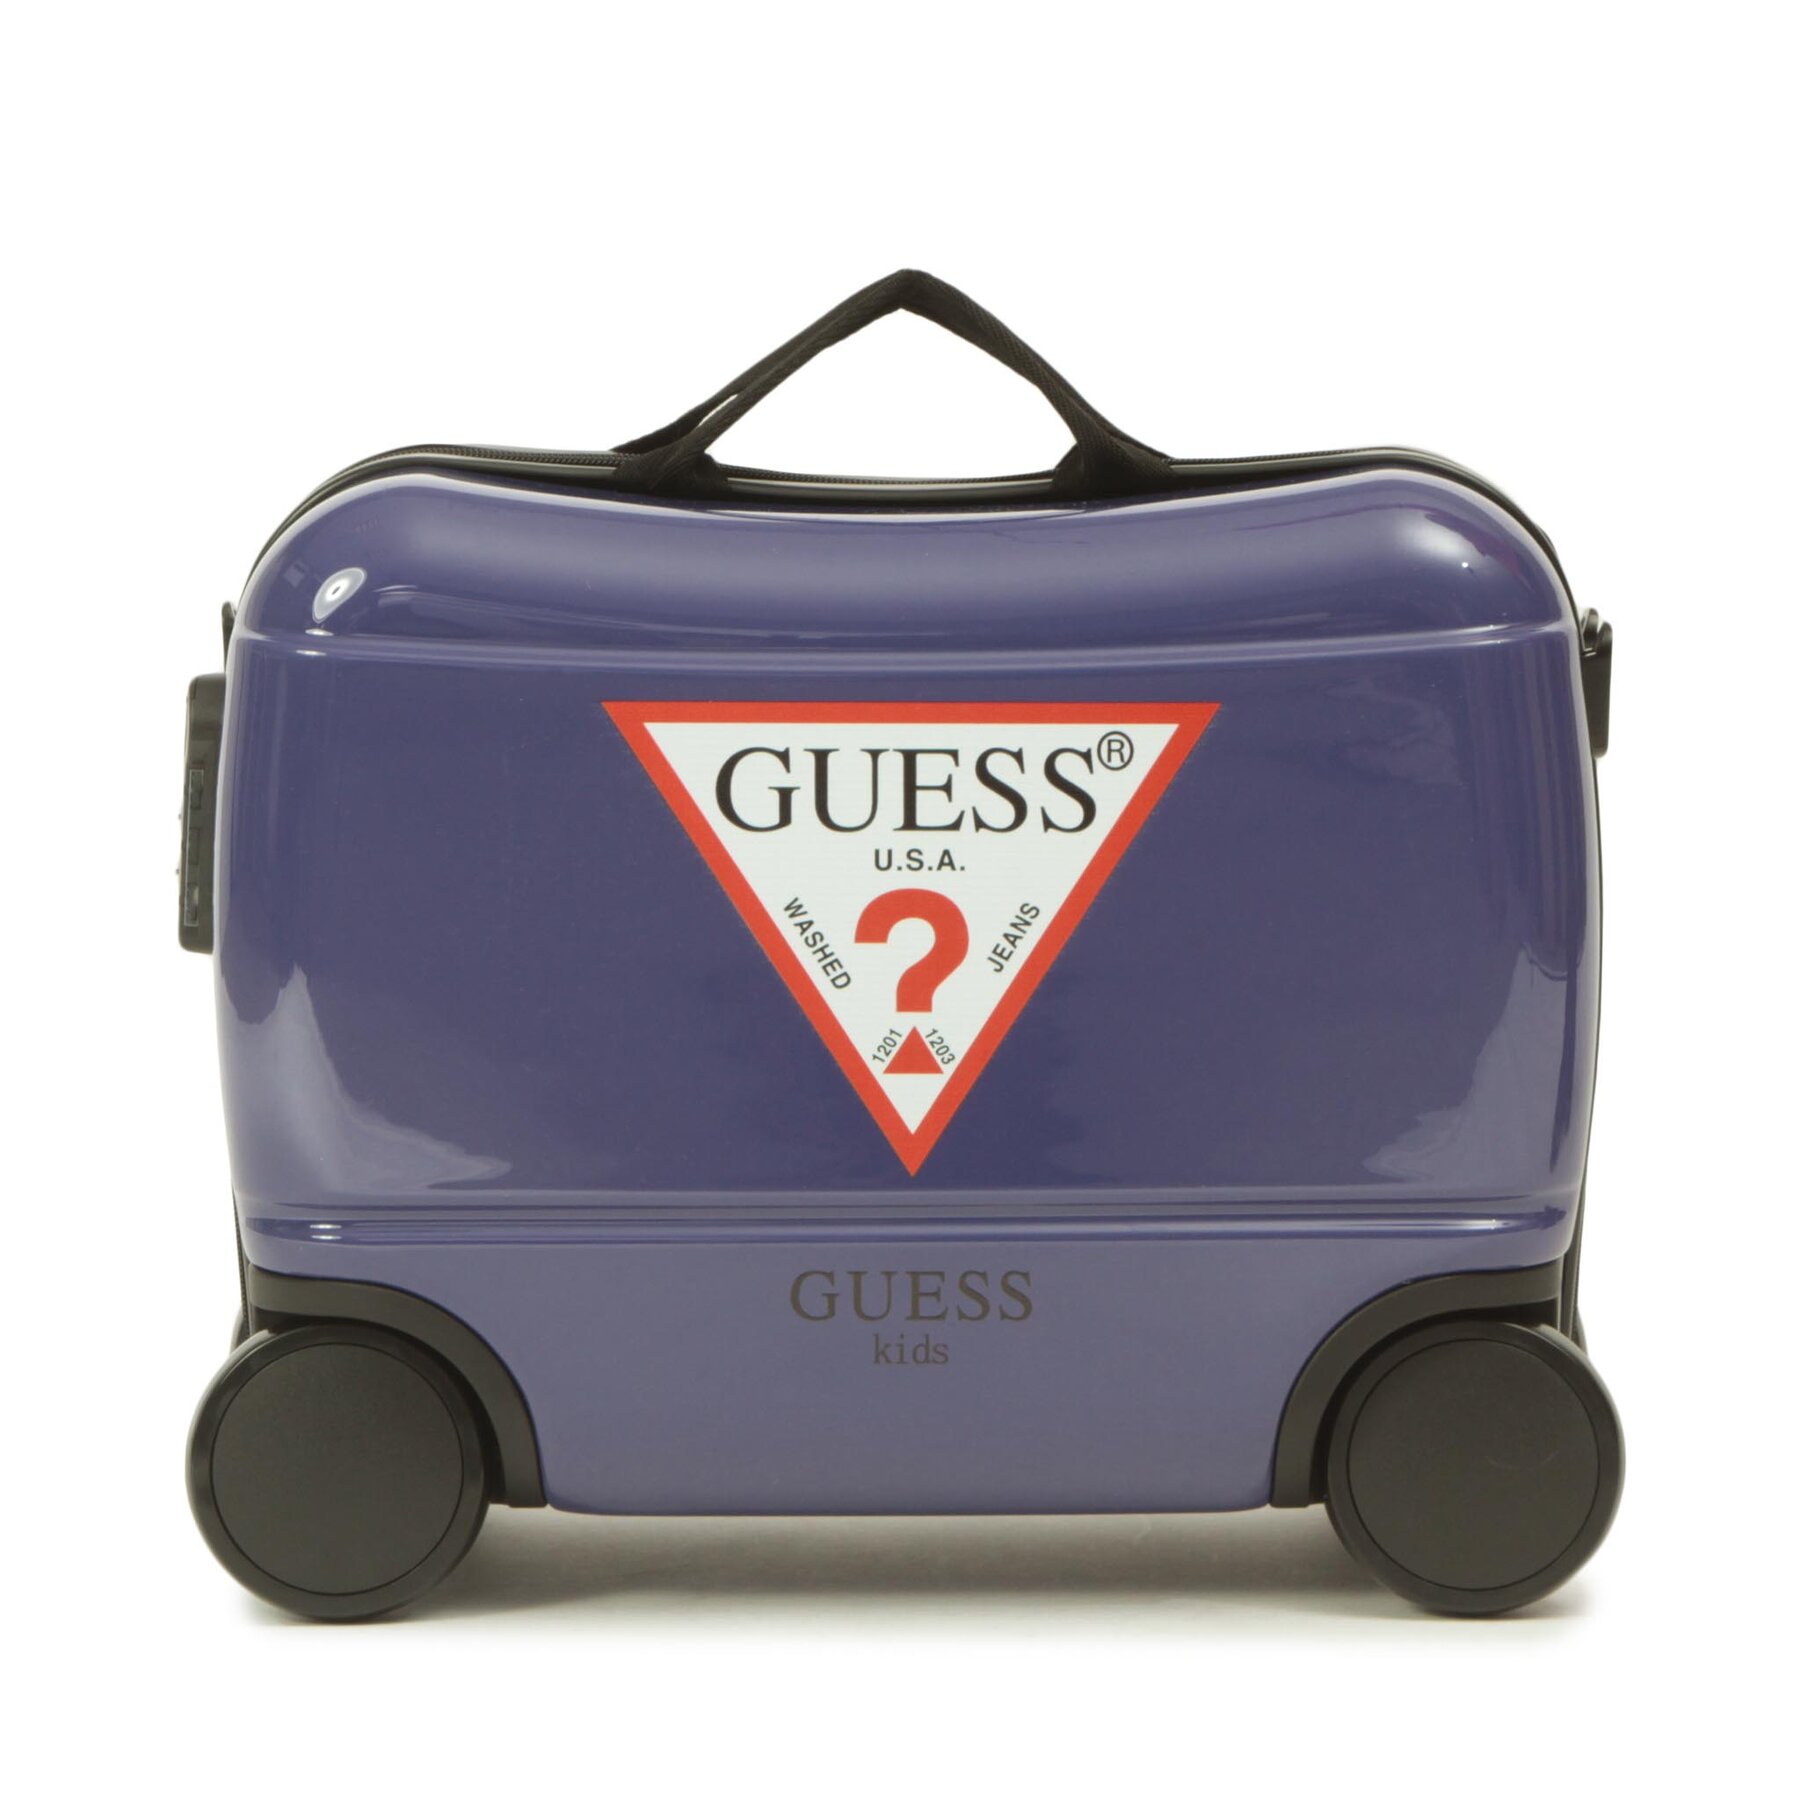 Kinderkoffer Guess H3GZ04 WFGY0 Dunkelblau von Guess